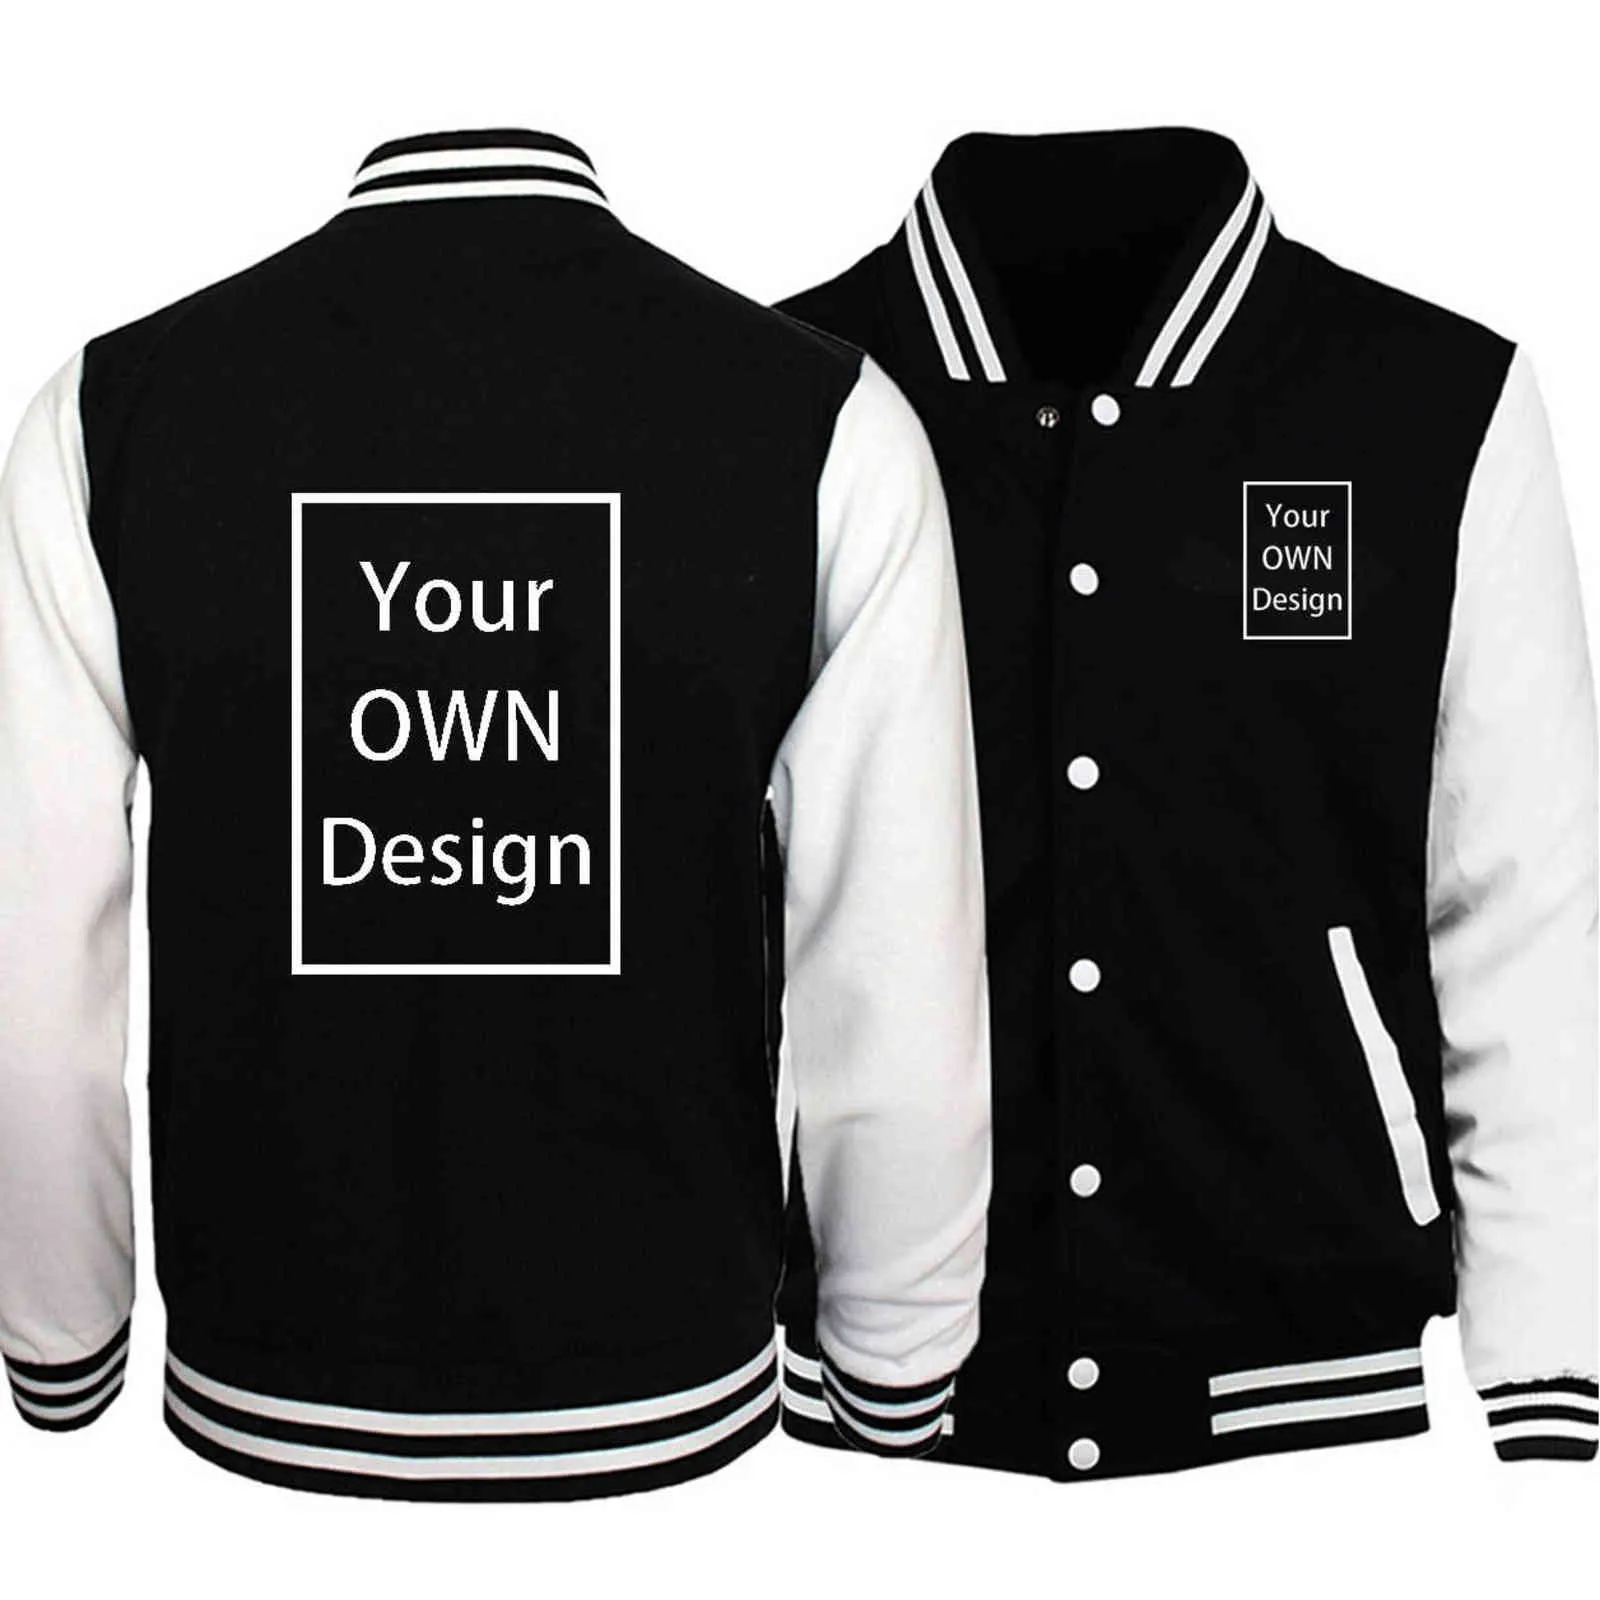 Your OWN Design Brand /Picture Custom Unisex DIY Winter Fleece Jacket Casual Hoody Clothing black white Tracksuit Fashion Y1106